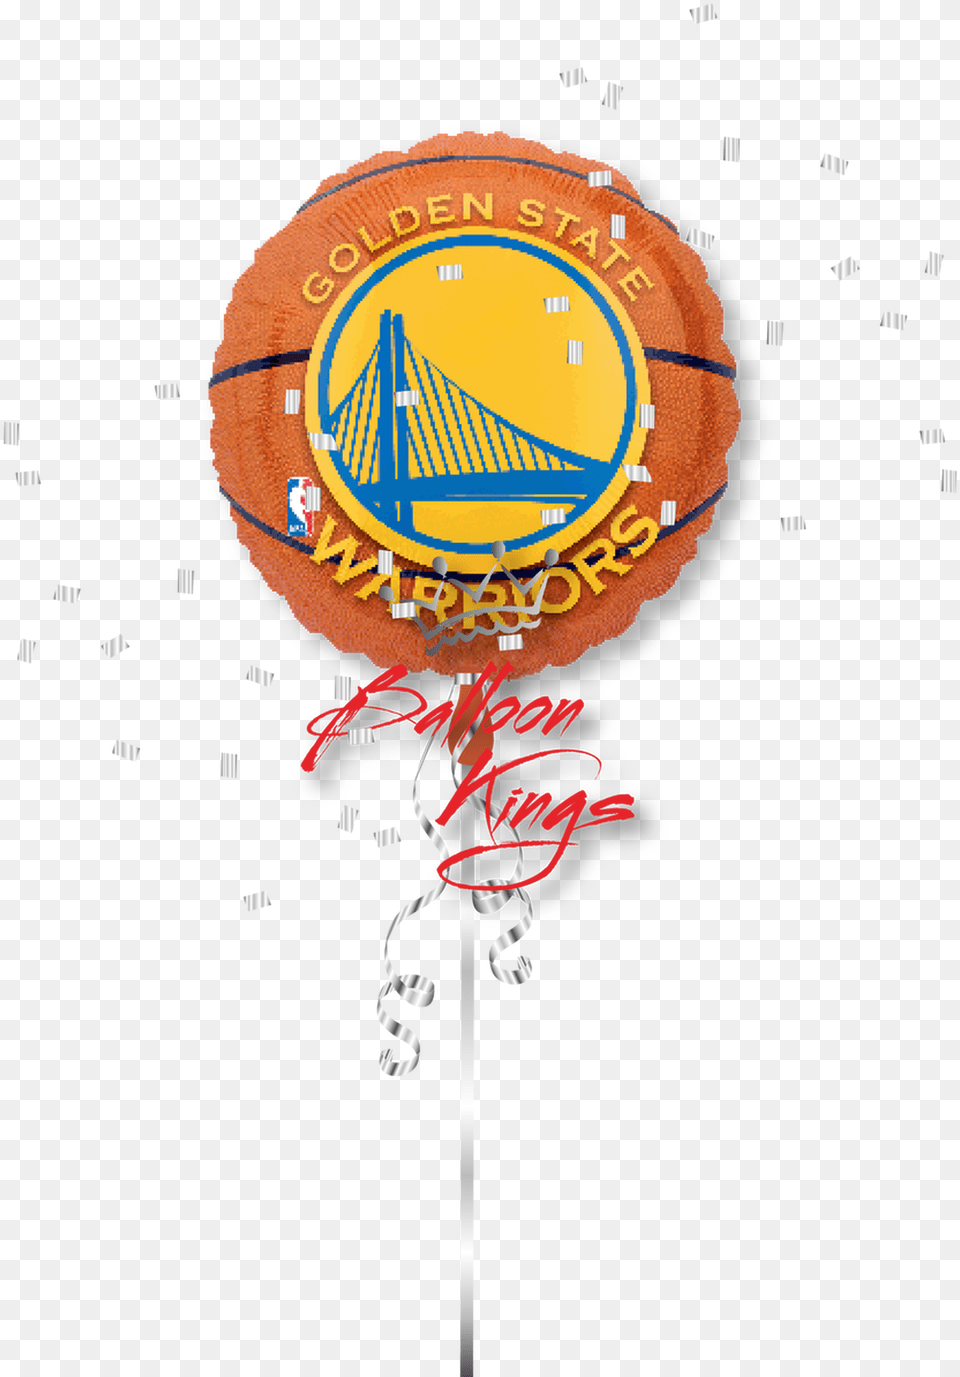 Golden State Warriors Celtics Balloon, Food, Sweets, Candy Png Image